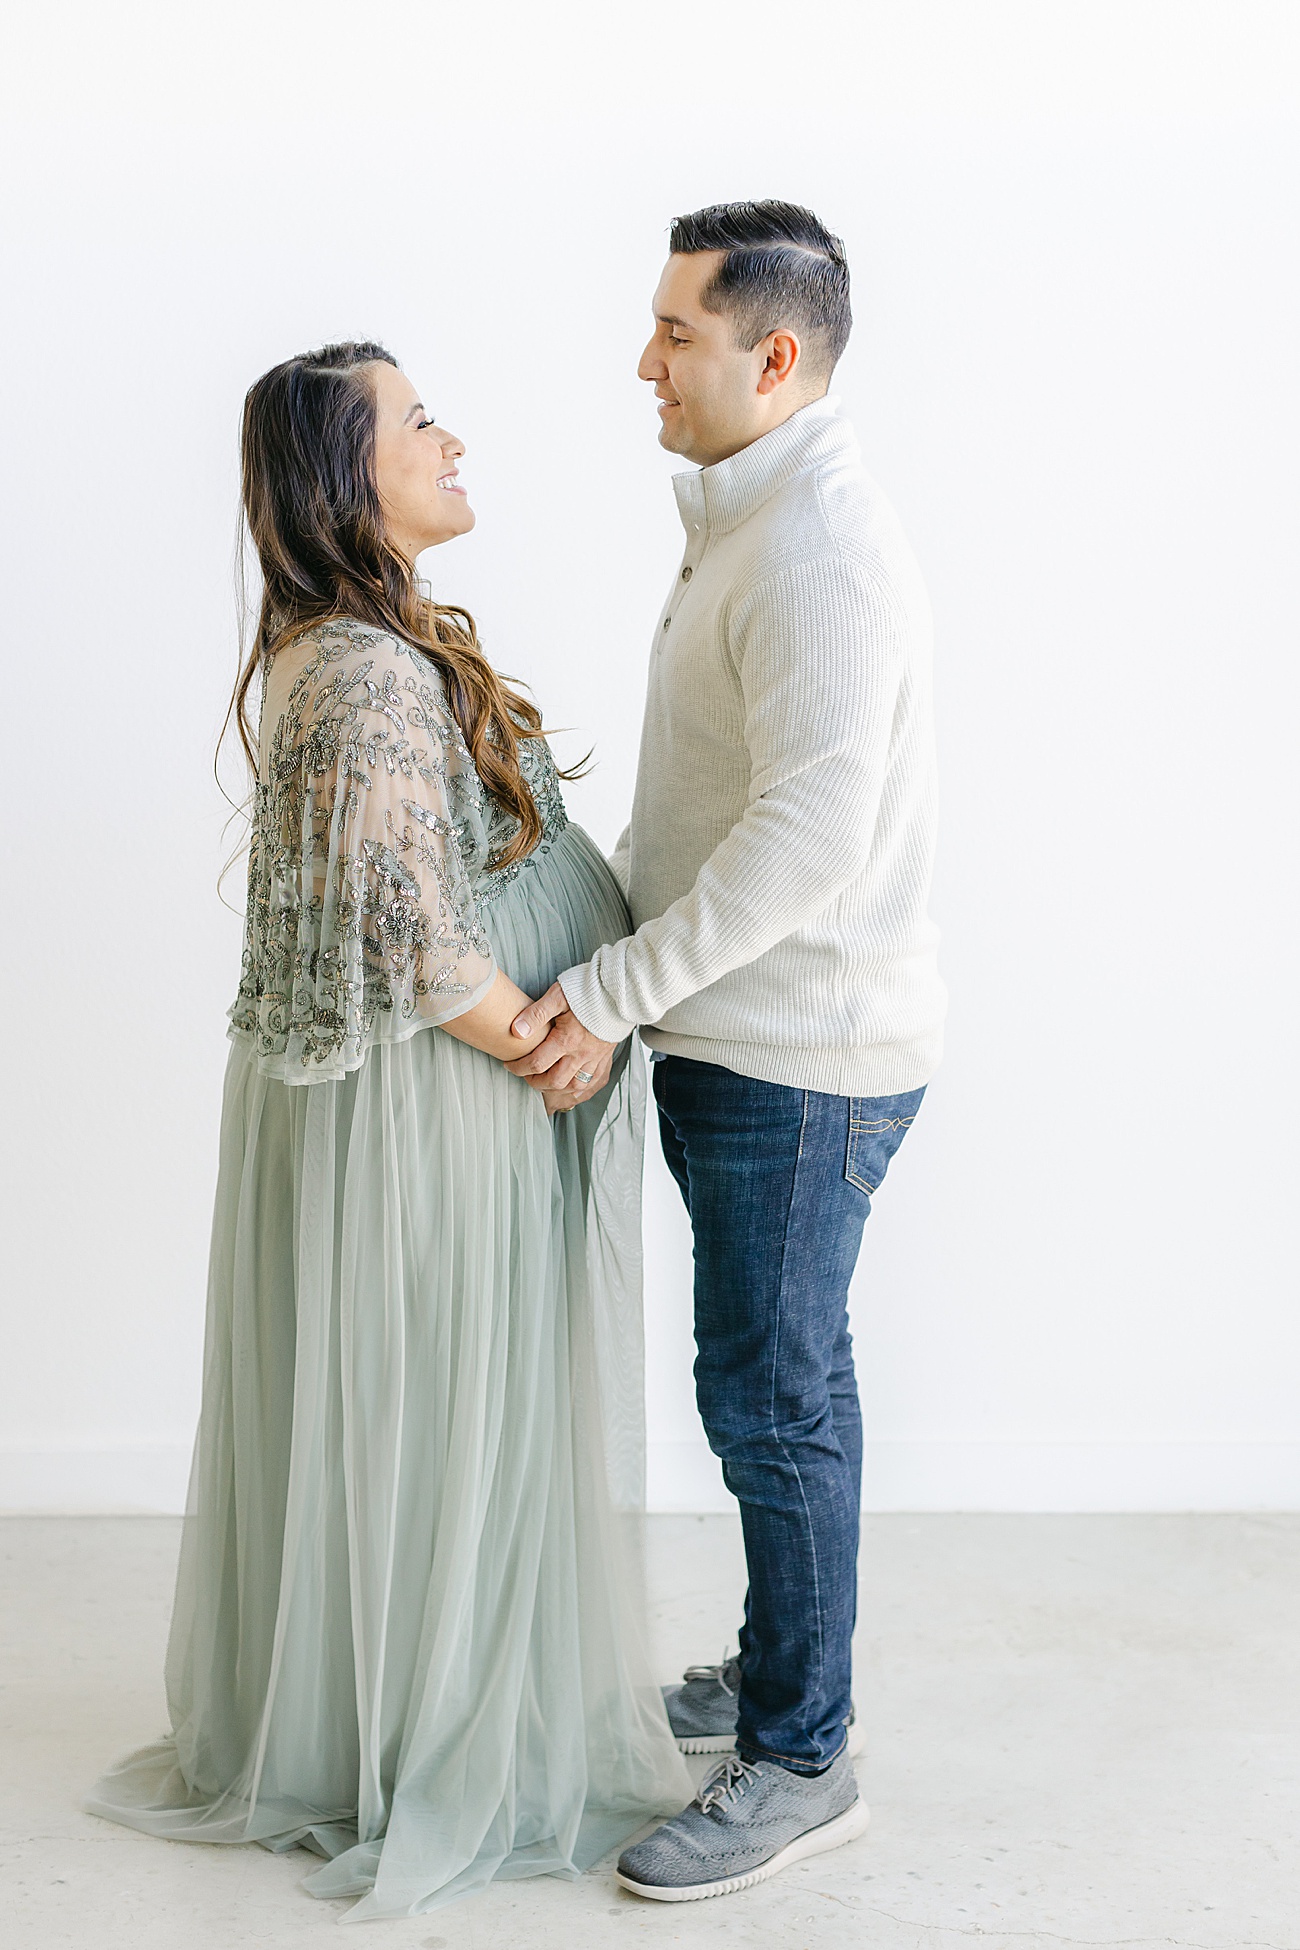 Mom and Dad looking at each other in studio maternity session for first baby. Photo by Sana Ahmed Photography.